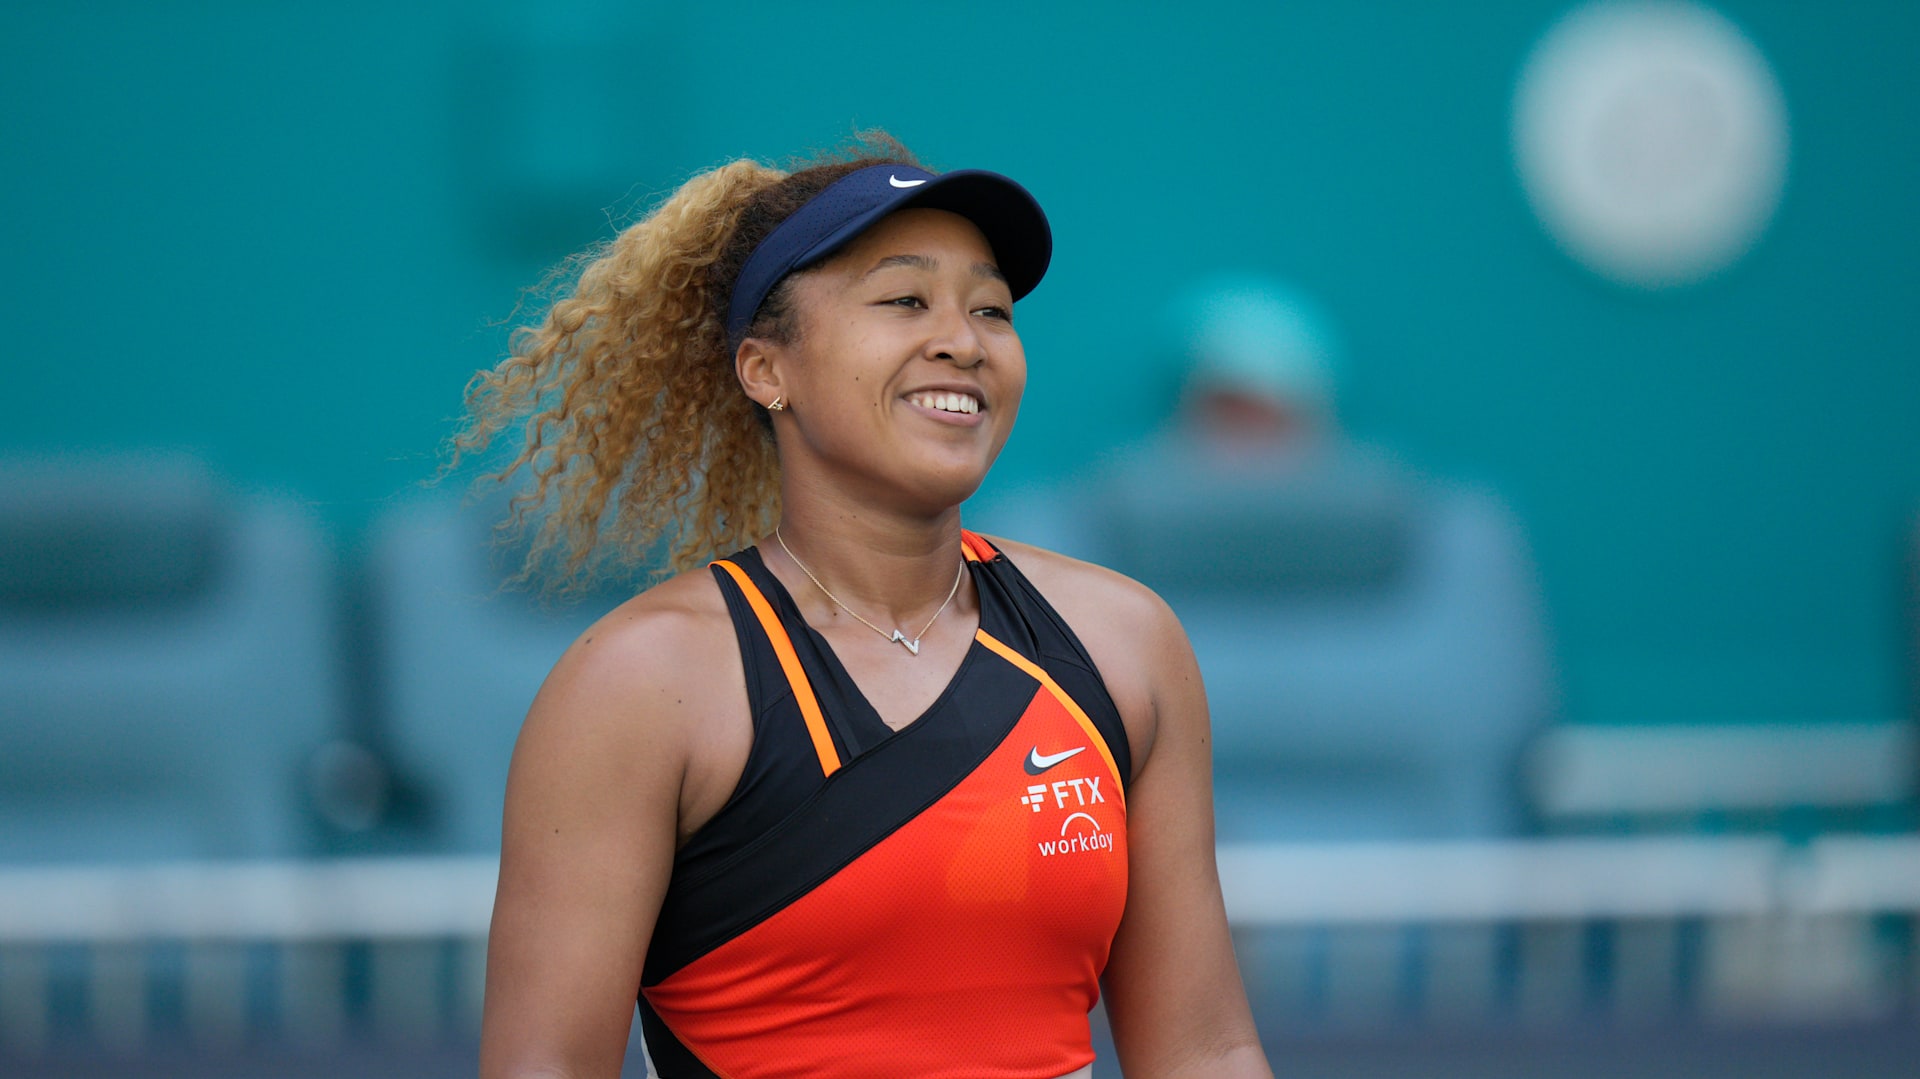 Pregnant Naomi Osaka Opens Up About Pregnancy And Motherhood